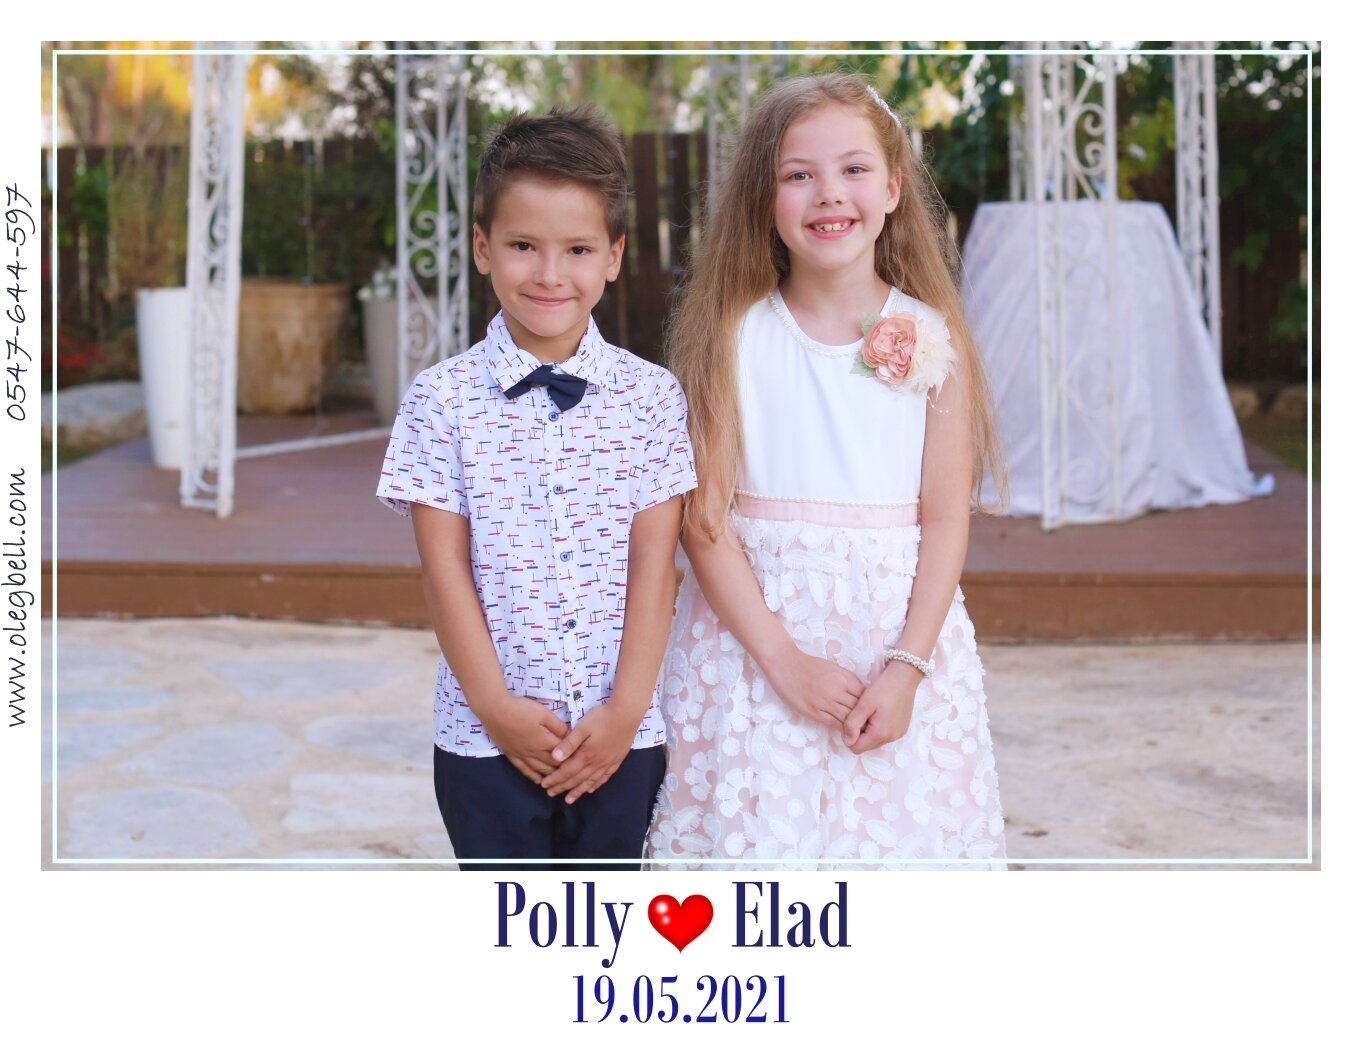 POLLY_AND_ELAD_WD_MG_SITE_005.JPG